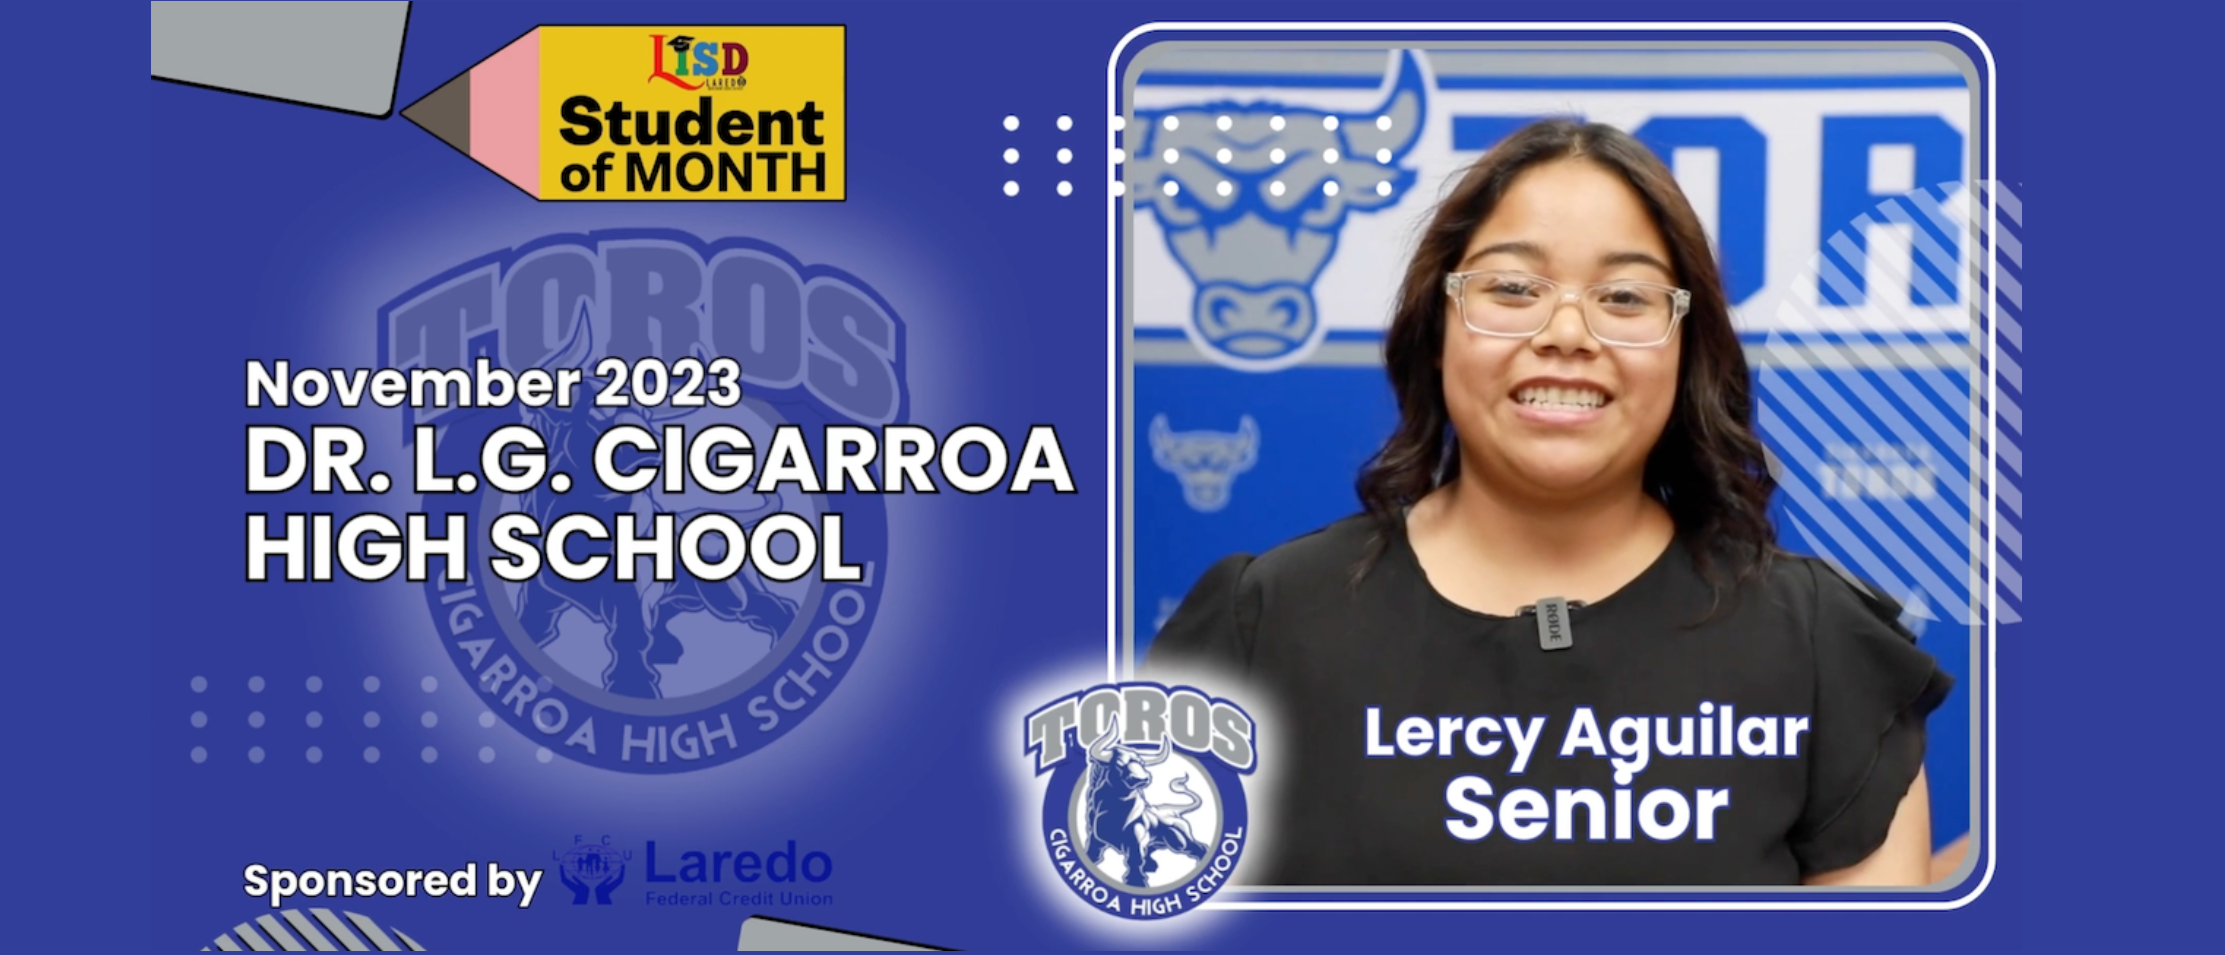 Student of the Month Lercy